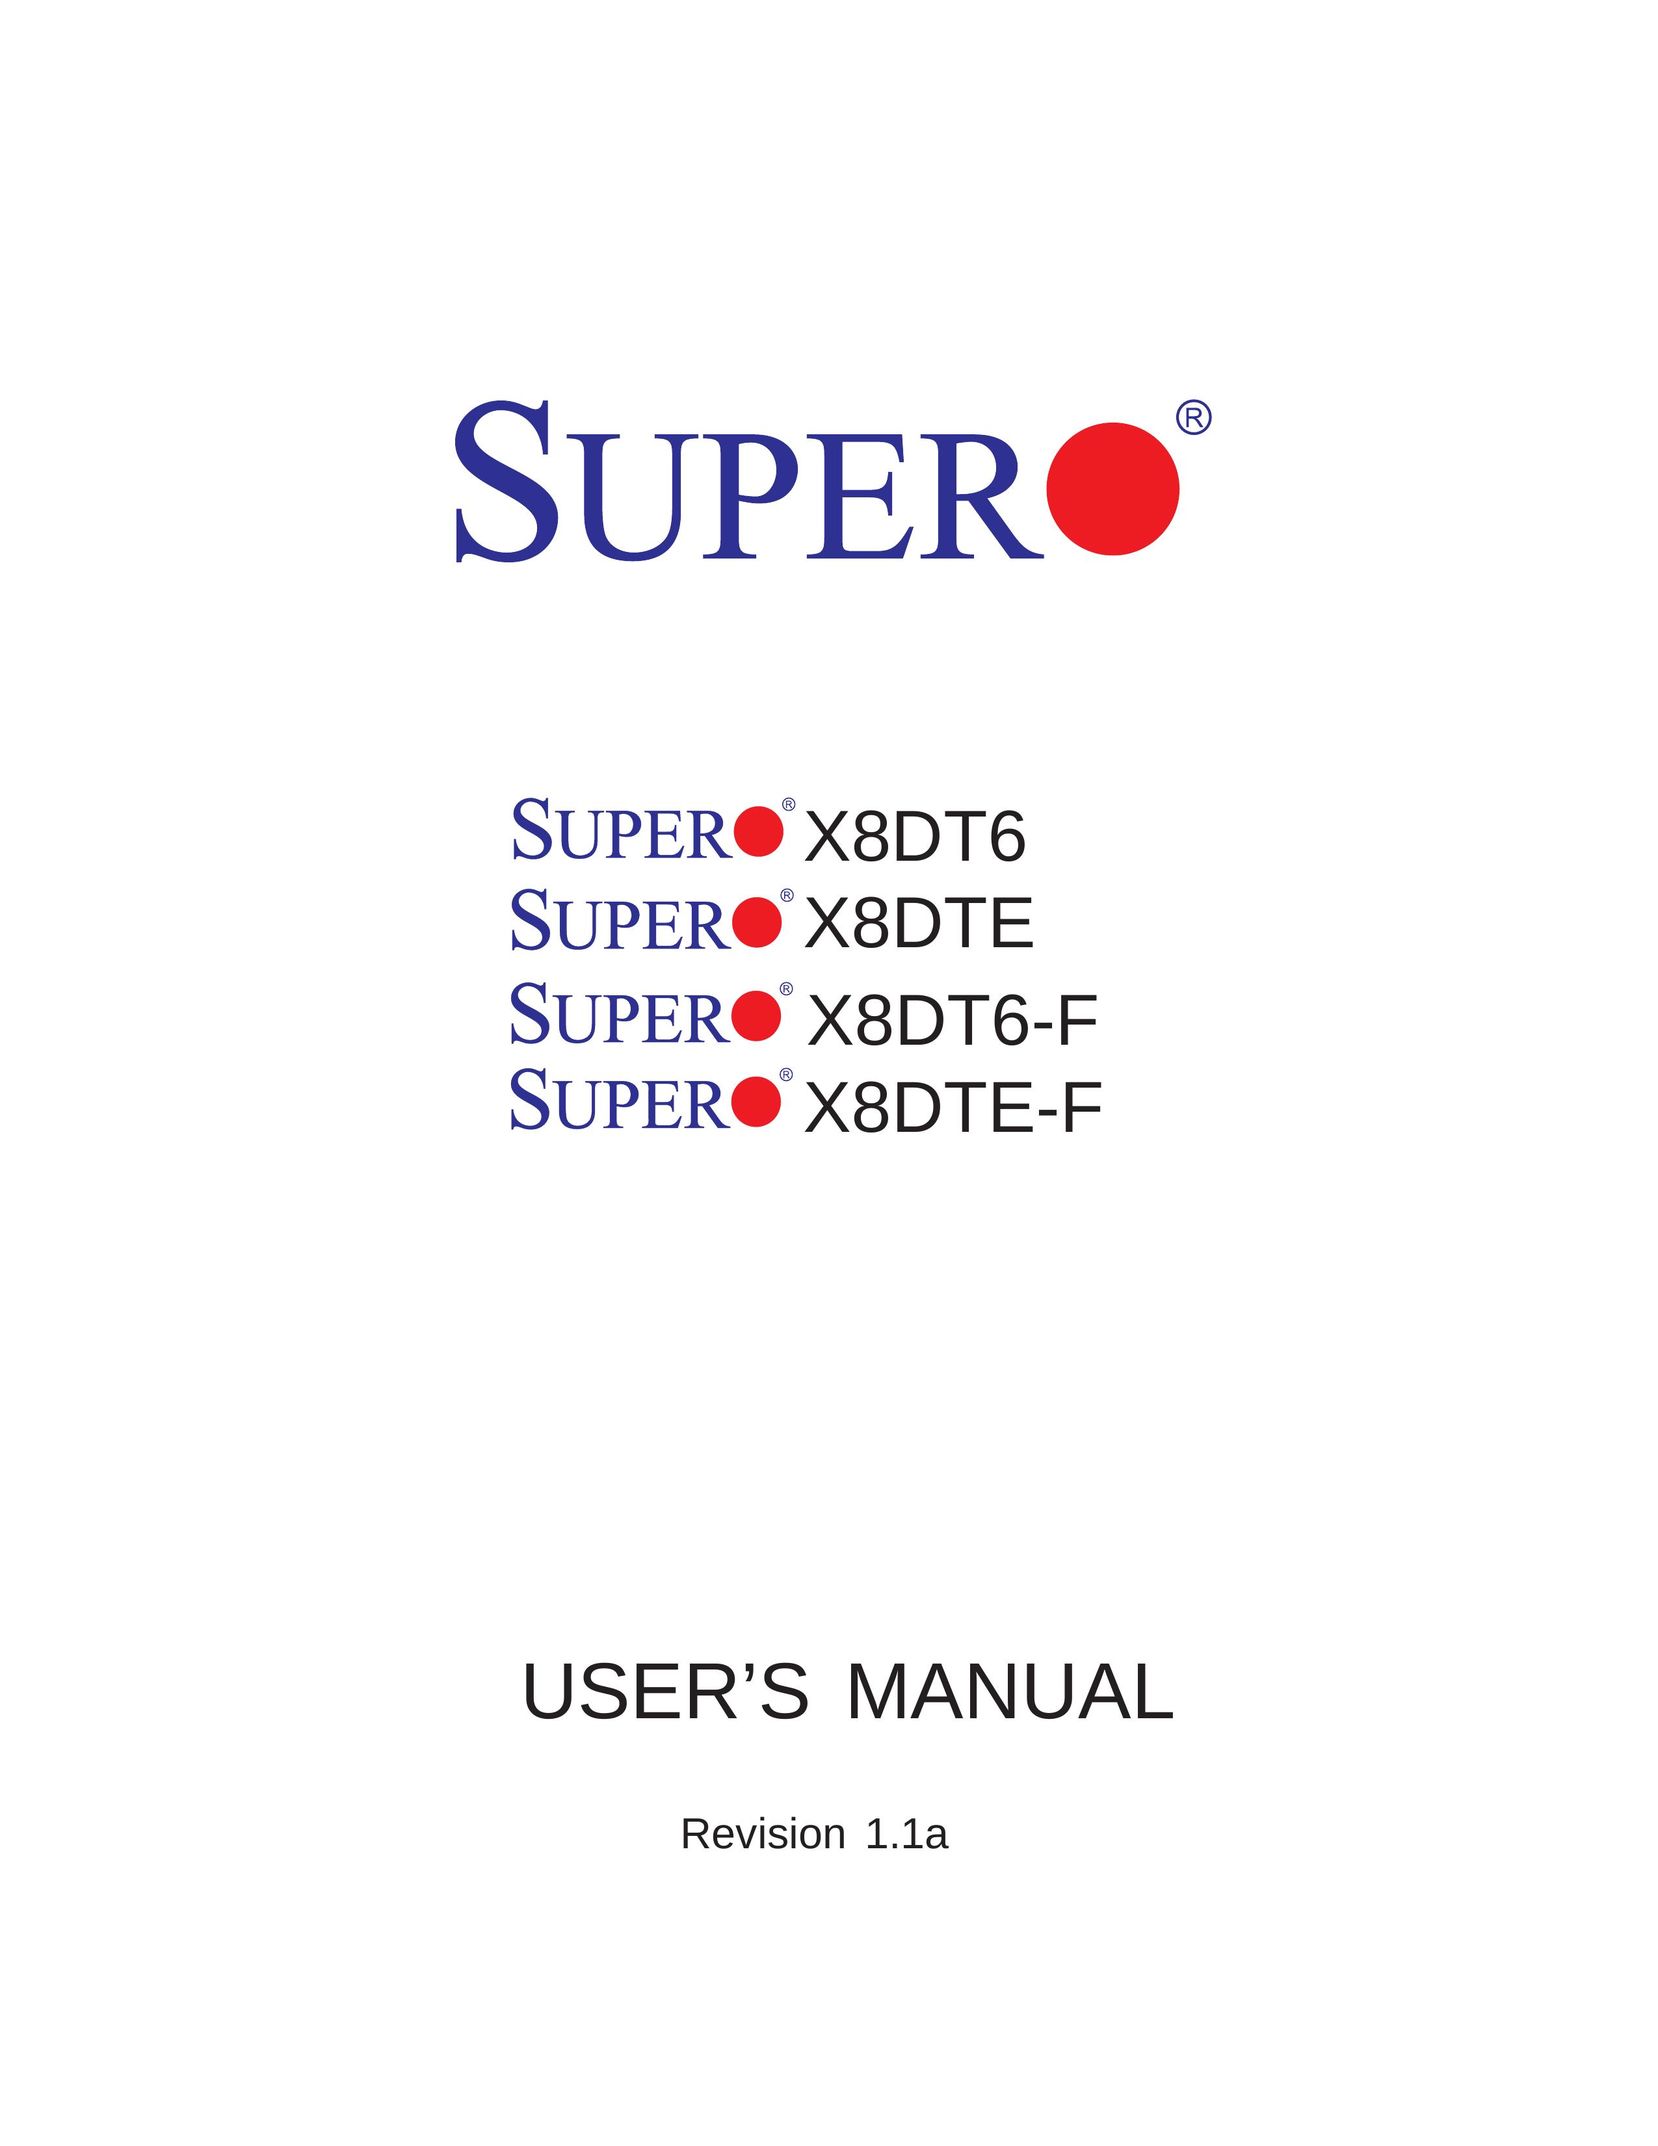 SUPER MICRO Computer X8DT6 Network Router User Manual